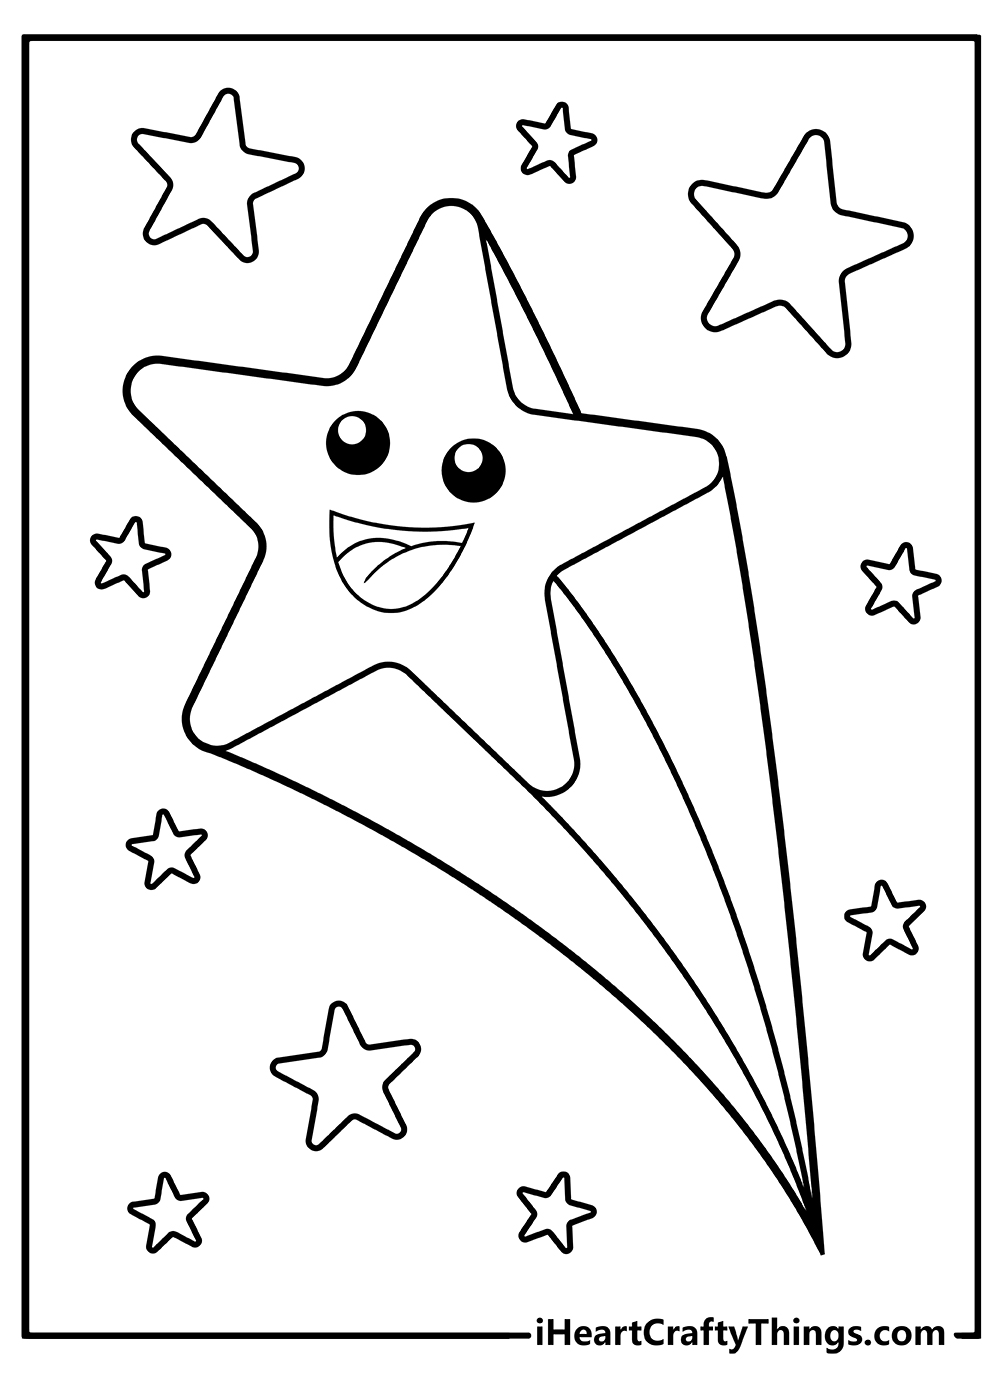 Star Coloring Pages free download